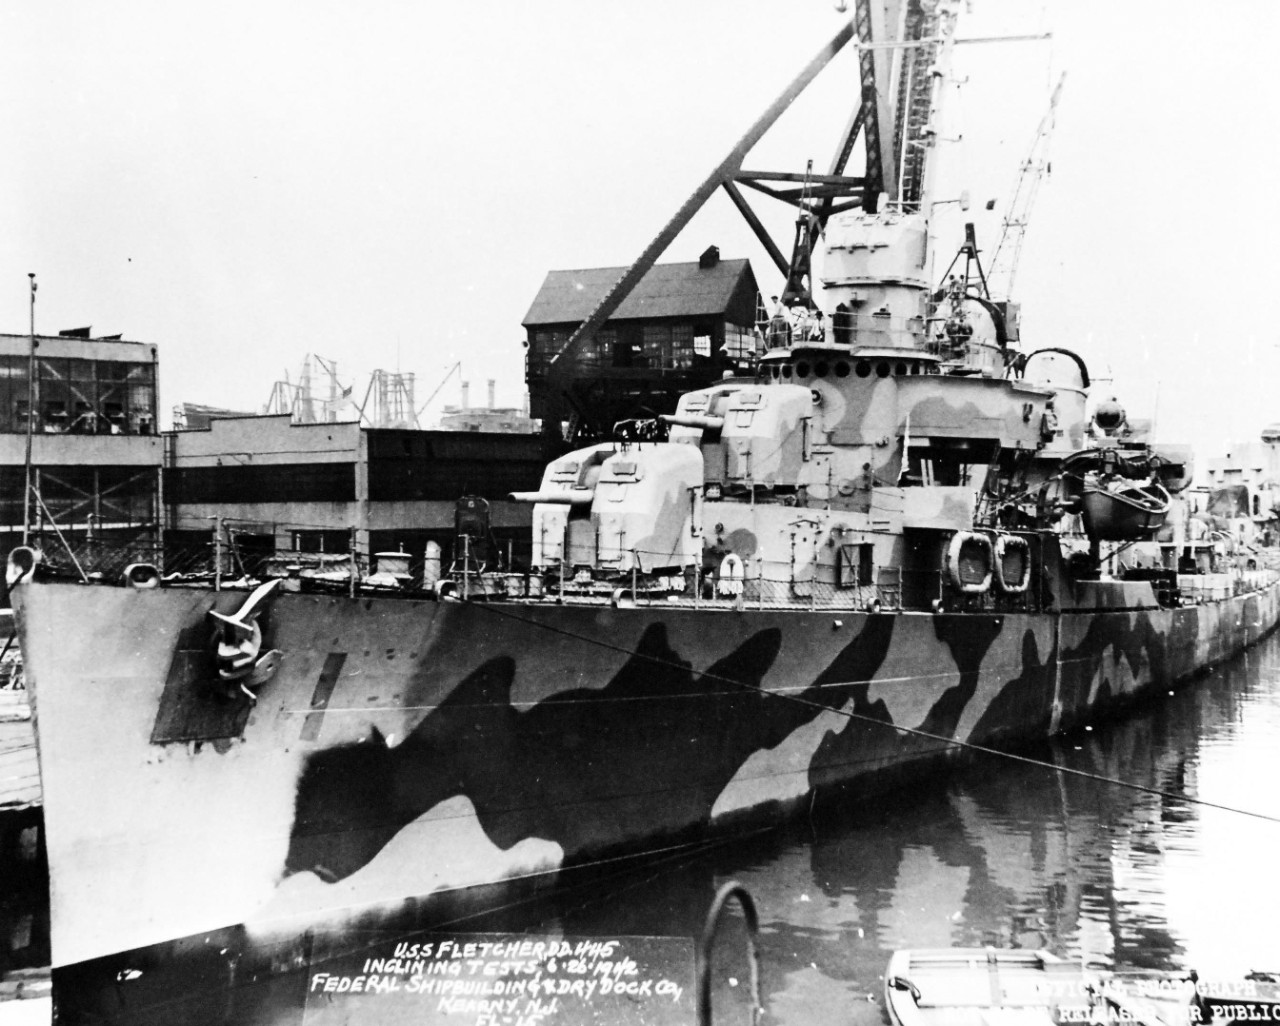 80-G-1049793:   USS Fletcher (DD-445), 1942.   Inclining tests on July 1942 at Federal Shipbuilding and Drydock Company, Kearny, New Jersey.   Official U.S. Navy Photograph, now in the collections of the National Archives.  (2017/09/19).  